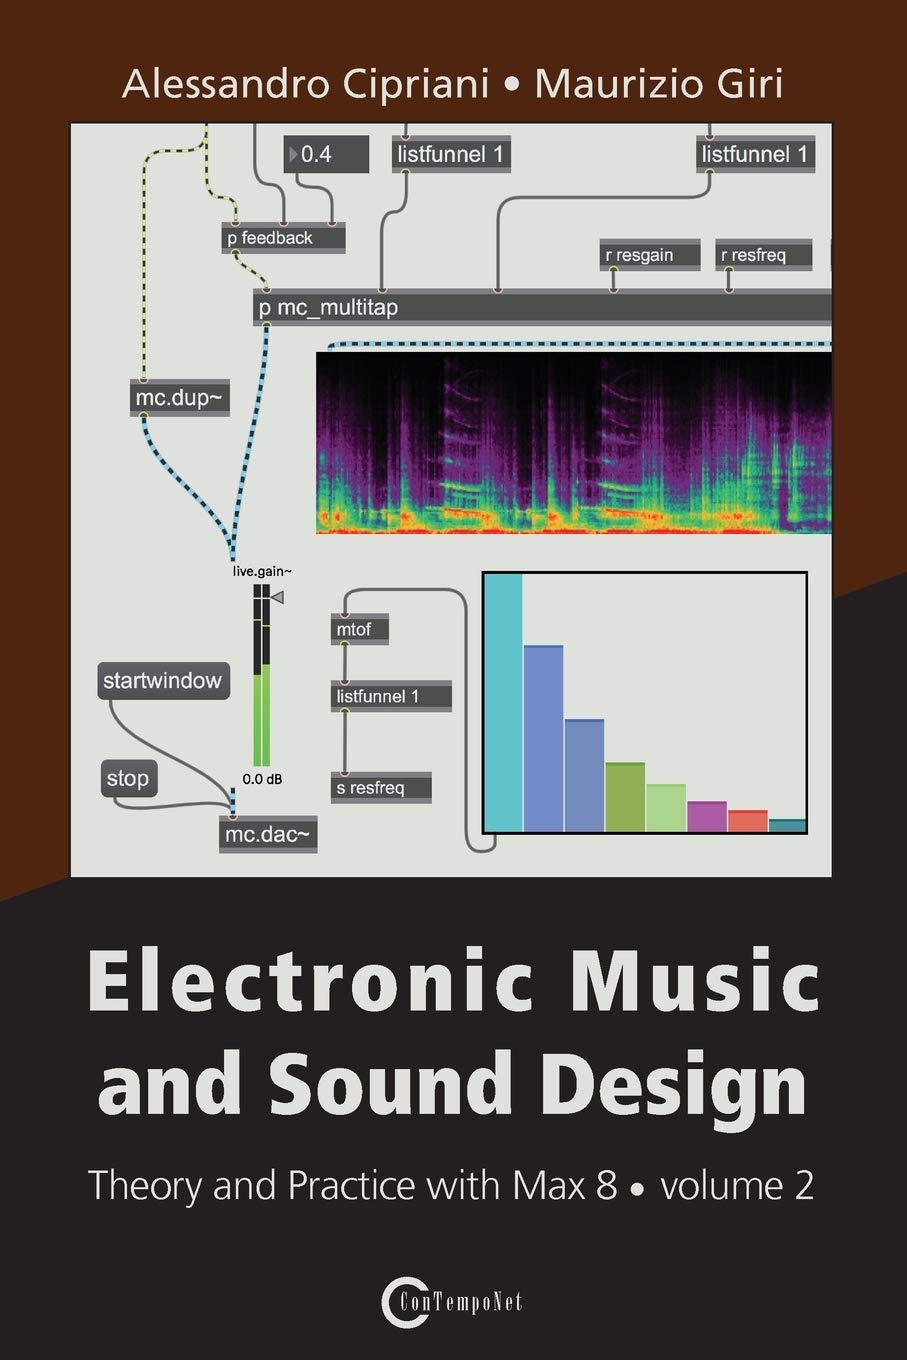 Electronic Music and Sound Design - Theory and Practice with Max 8